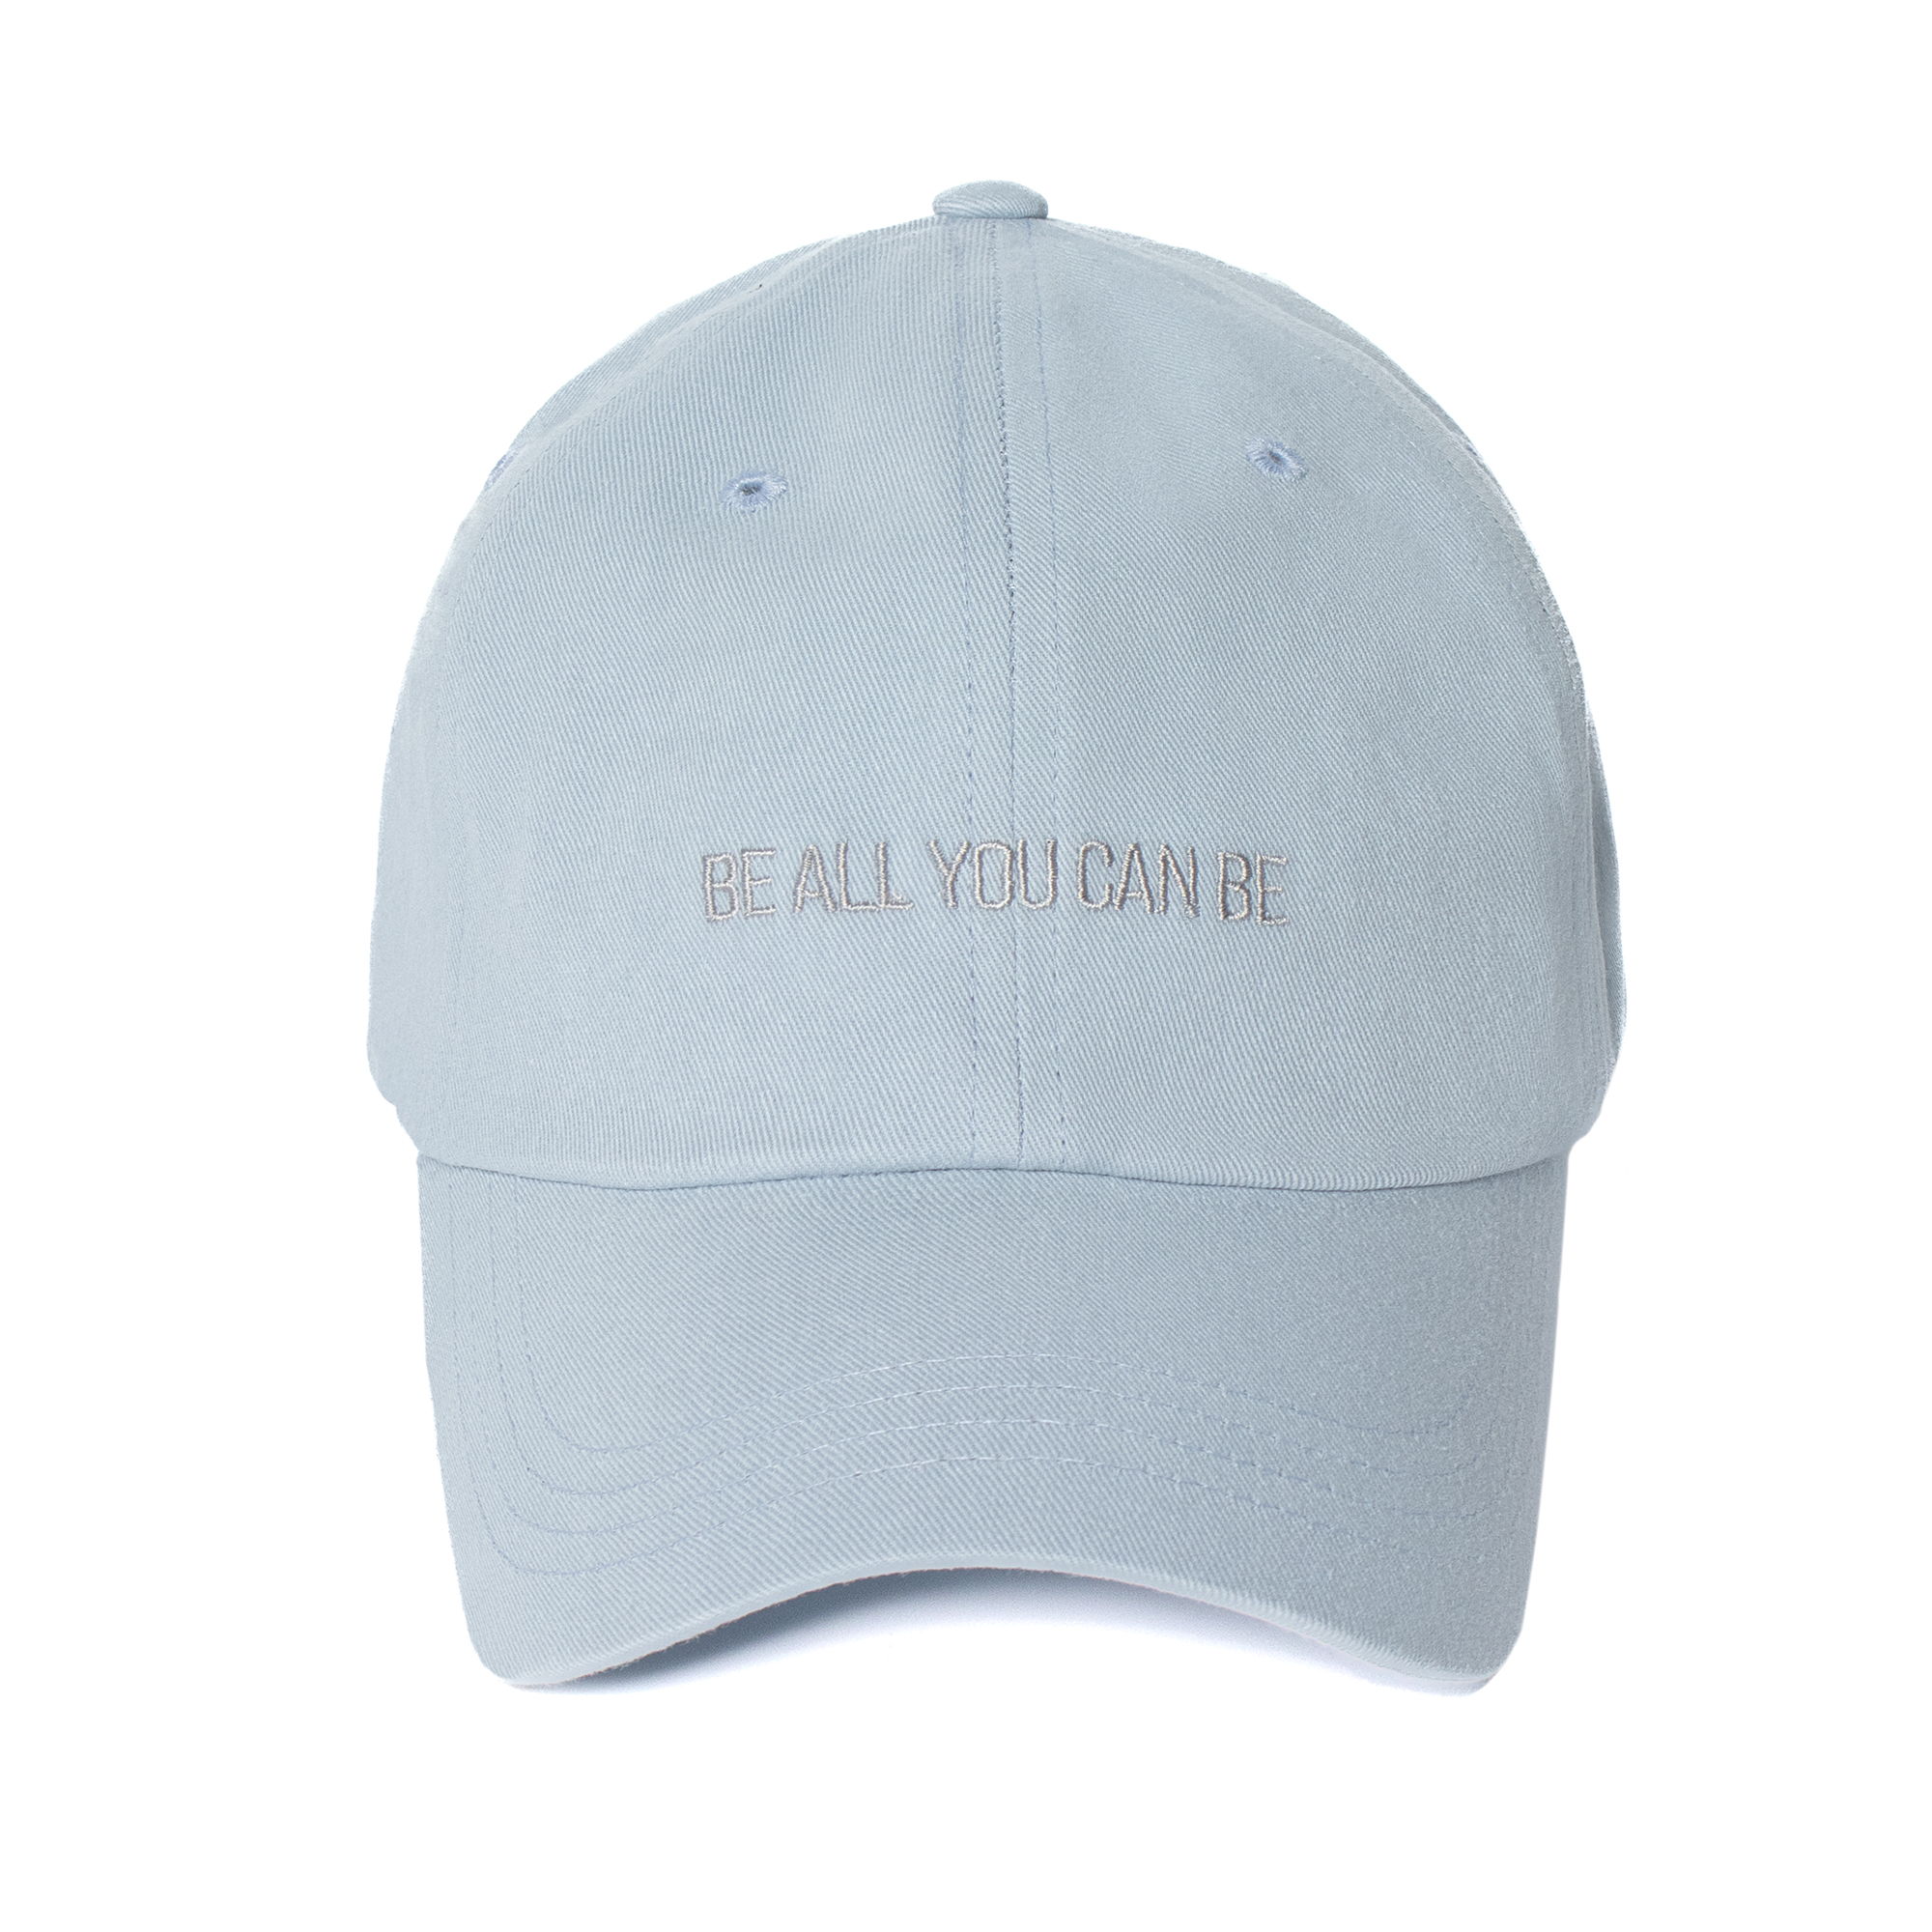 HW-BC160 : “Be All You Can Be” Ball CapㅣSky Blue